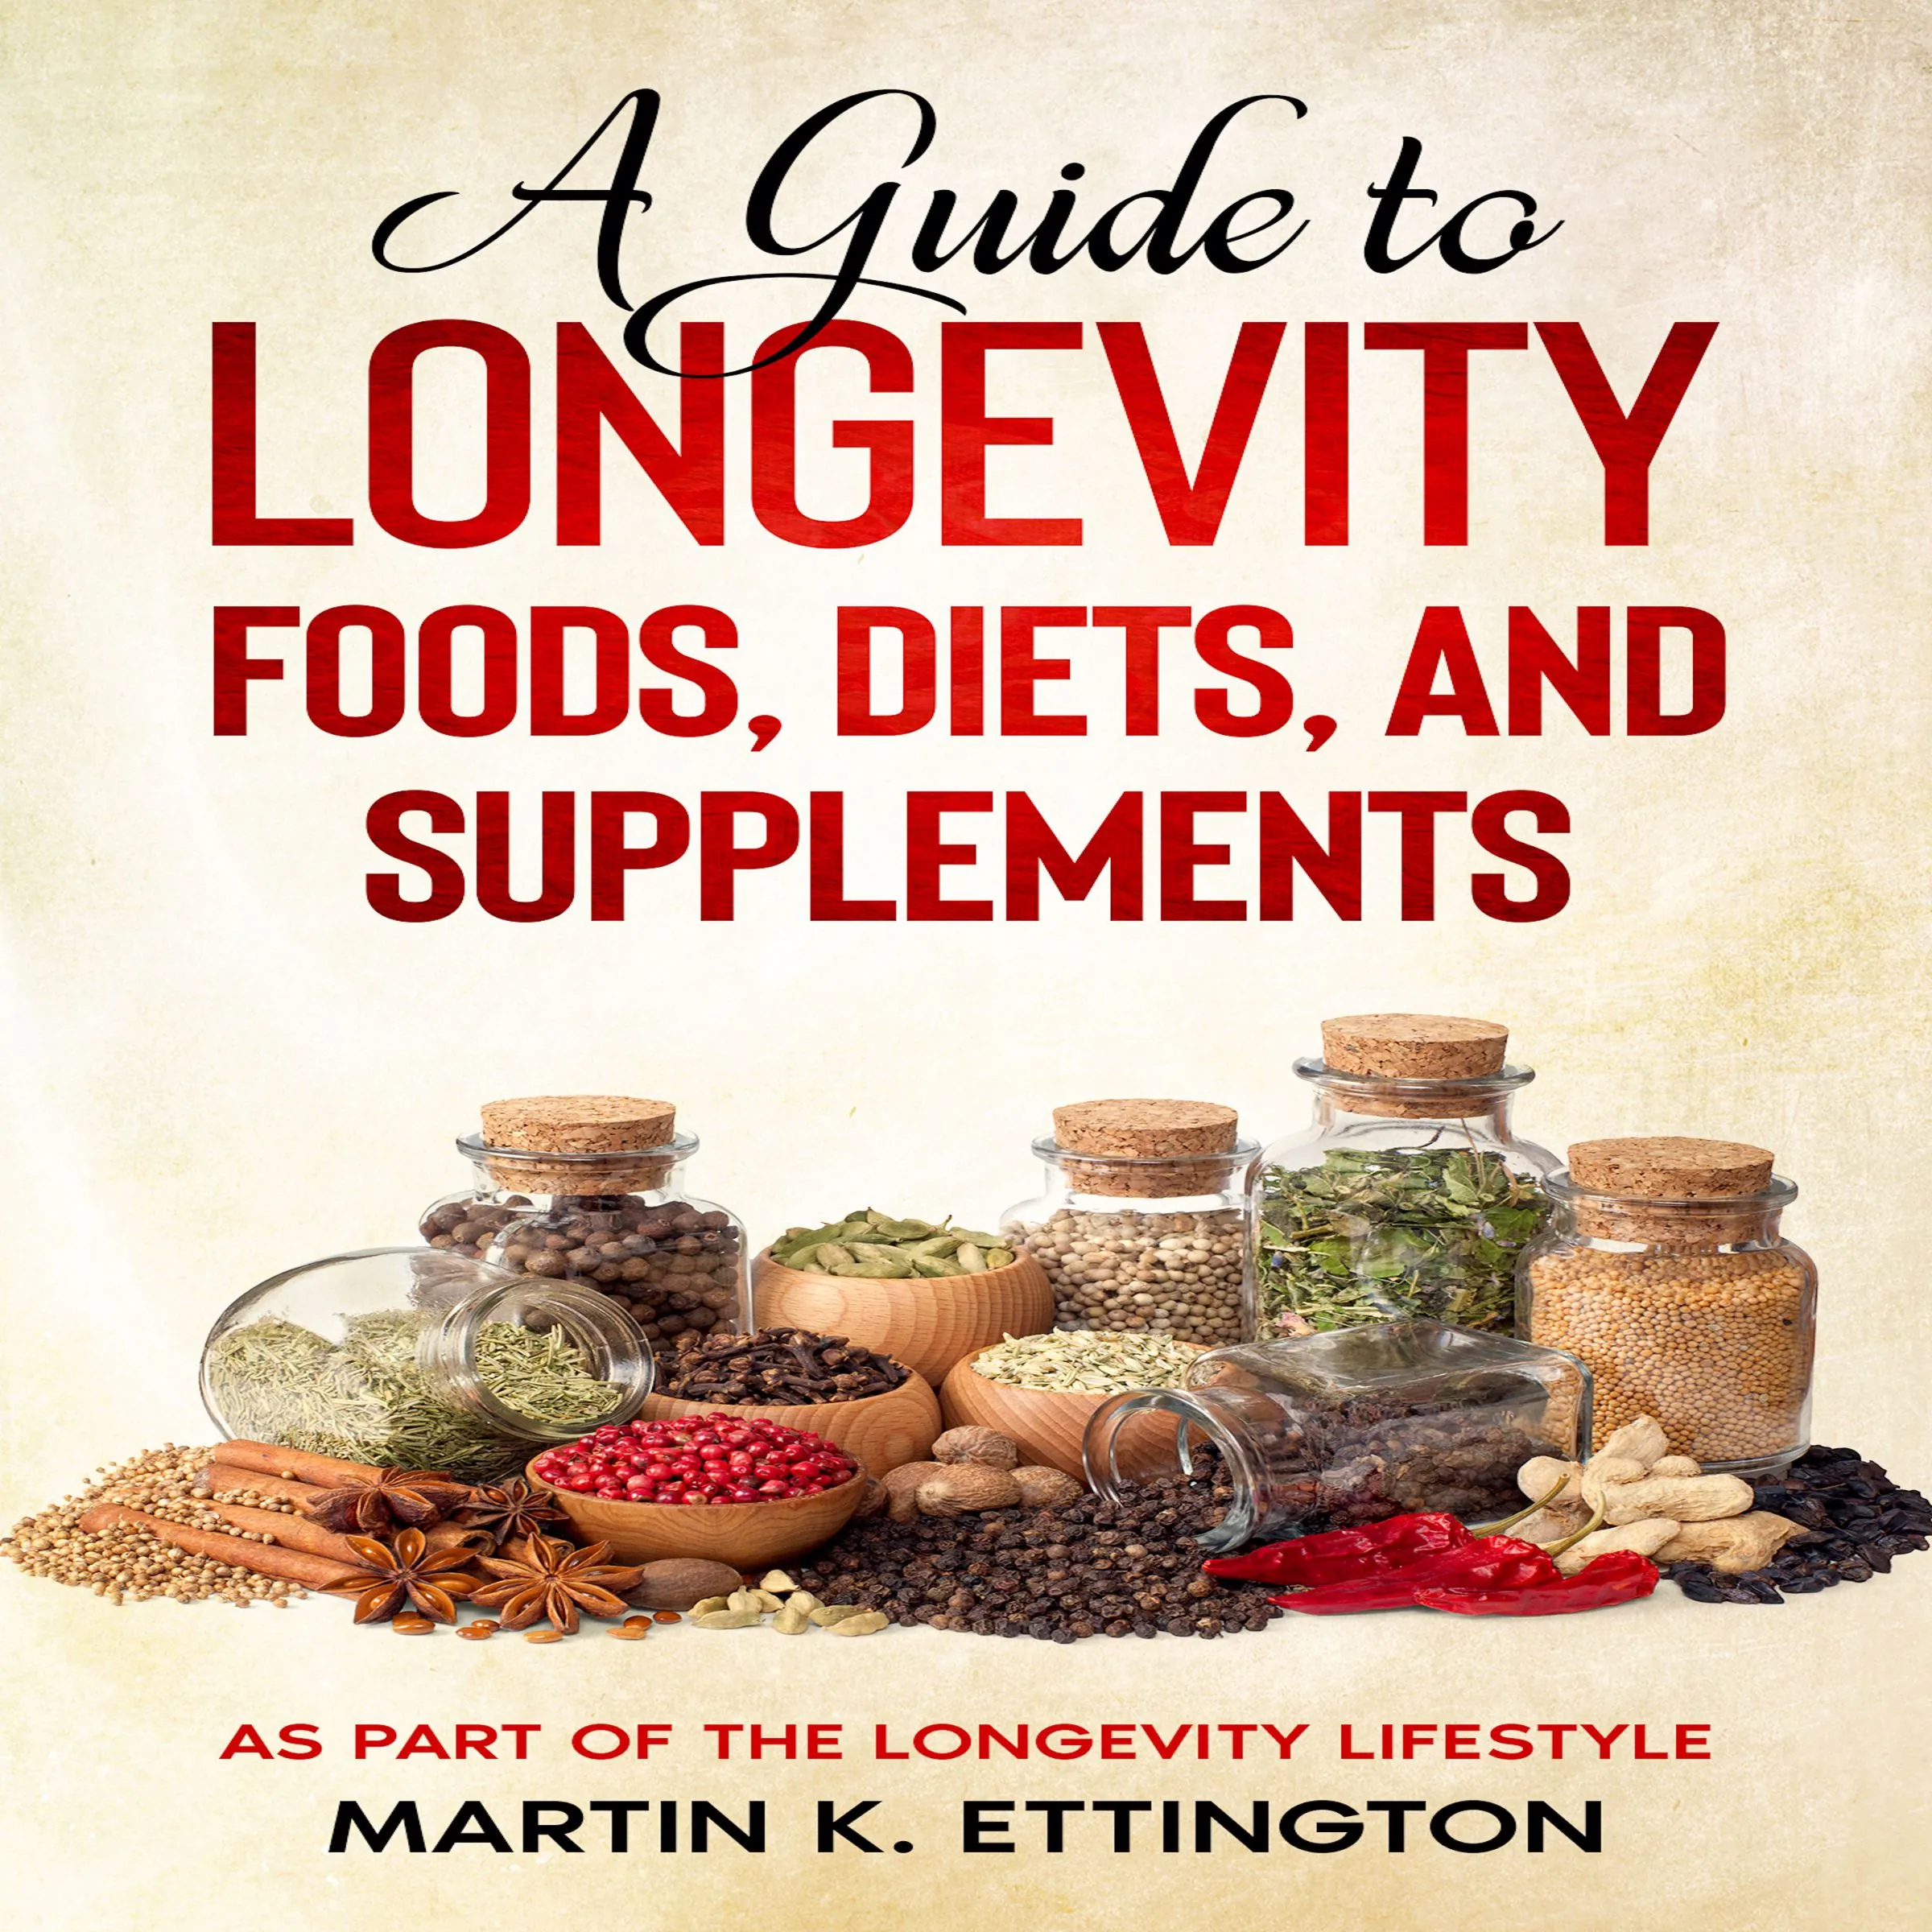 A Guide to Longevity Foods, Diets, and Supplements by Martin K. Ettington Audiobook